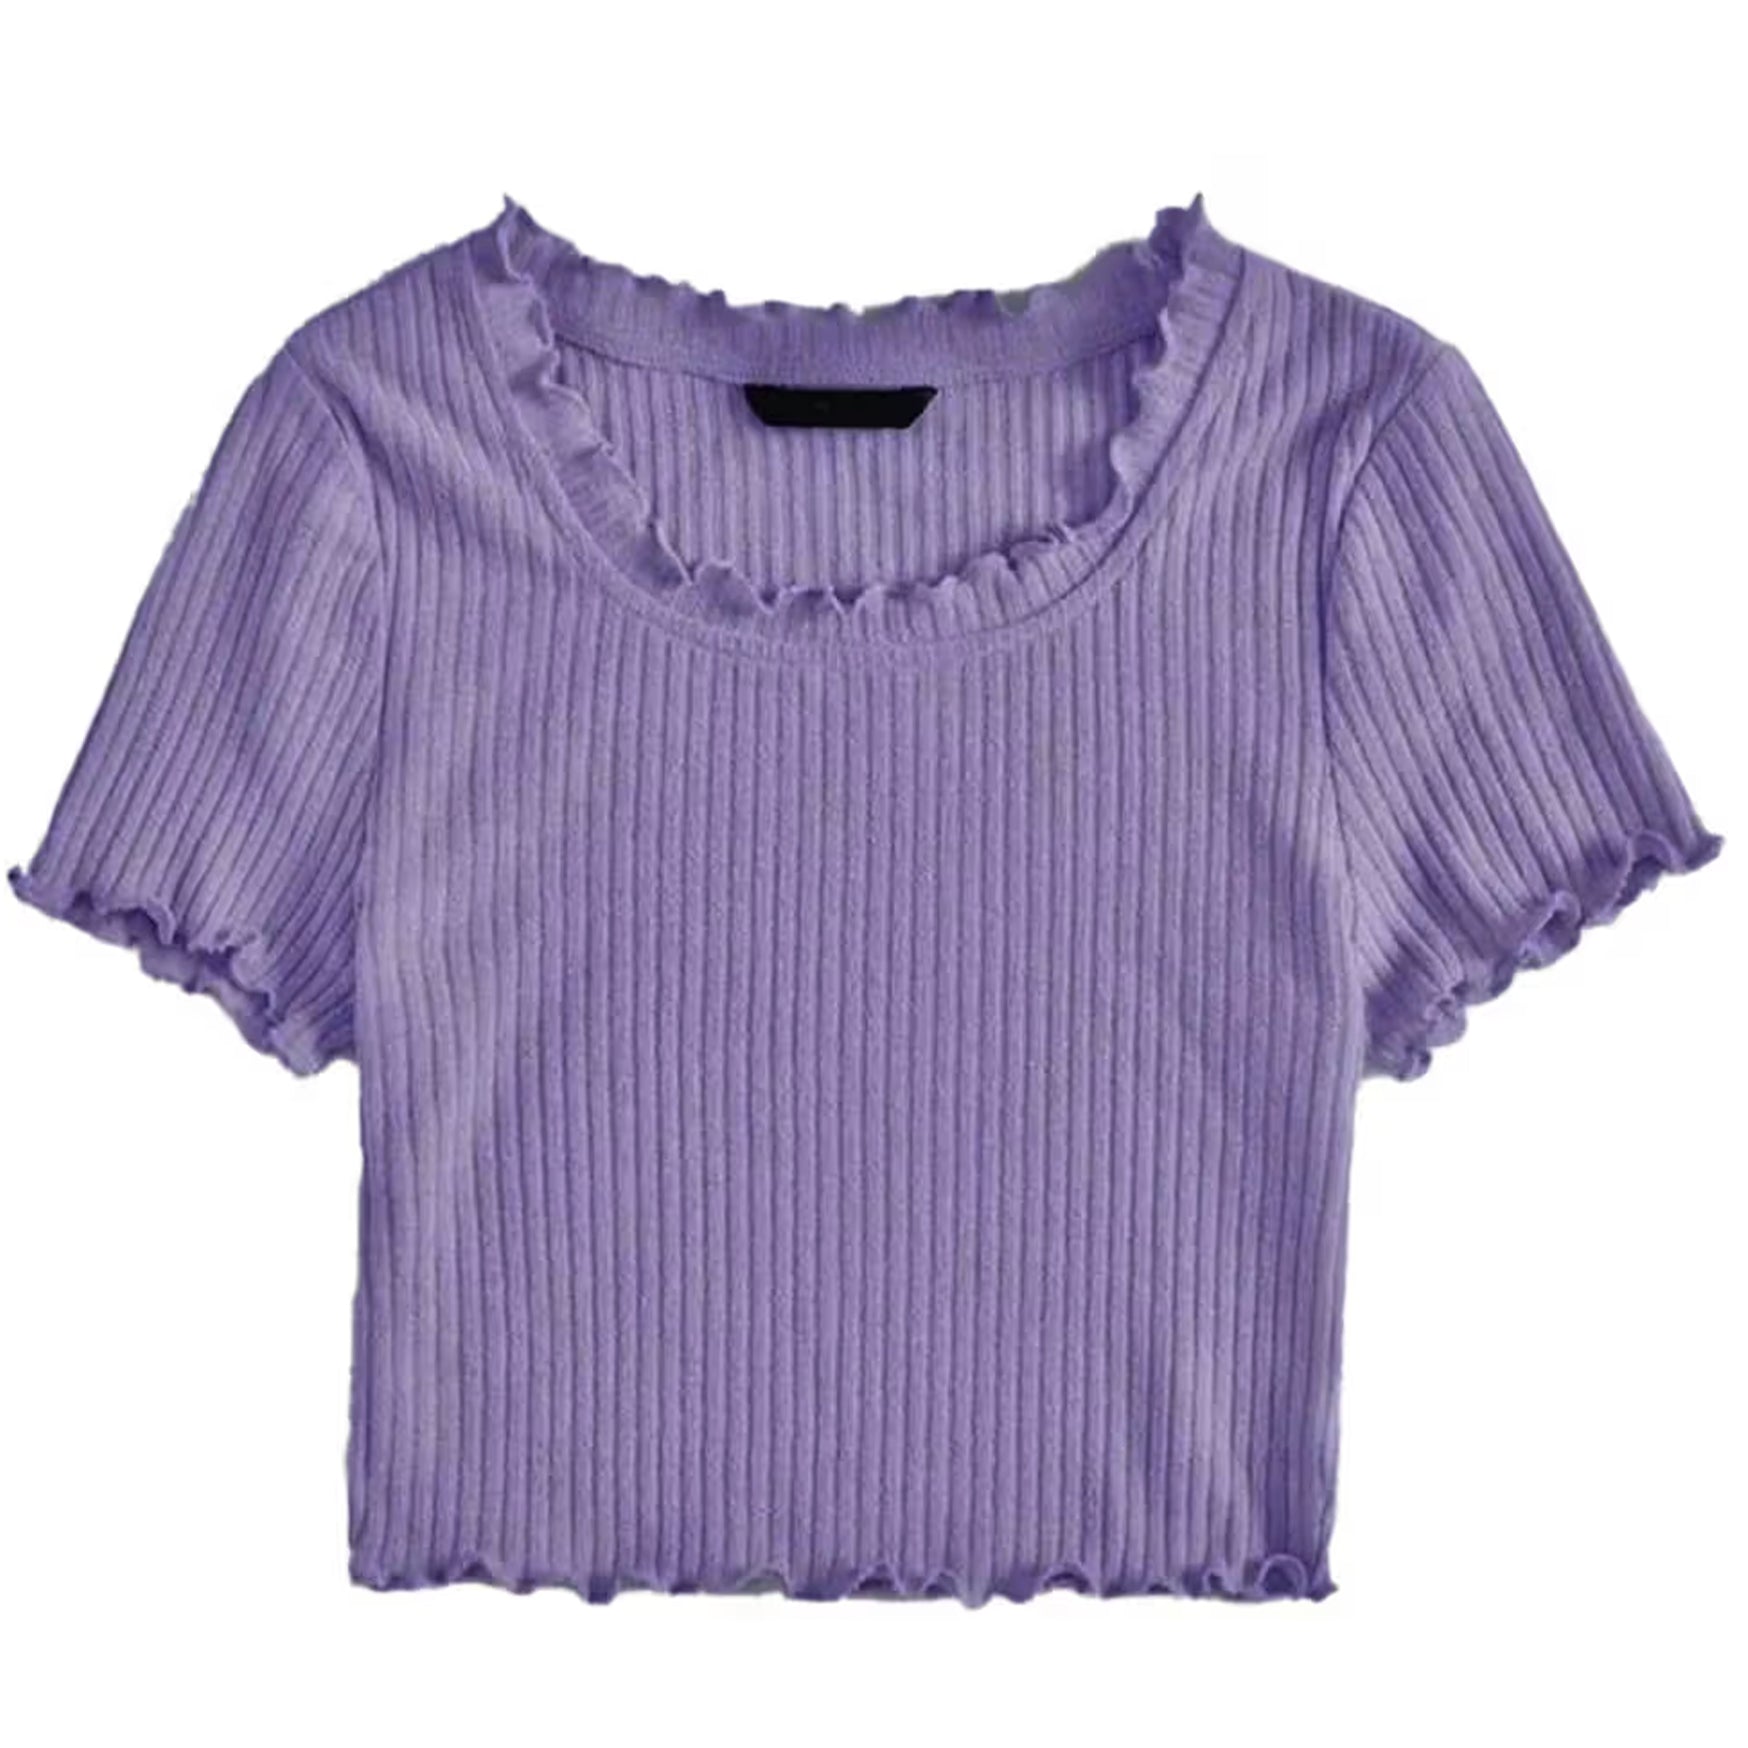 Khhalisi Knit Crop Top Purple for Womens (S)